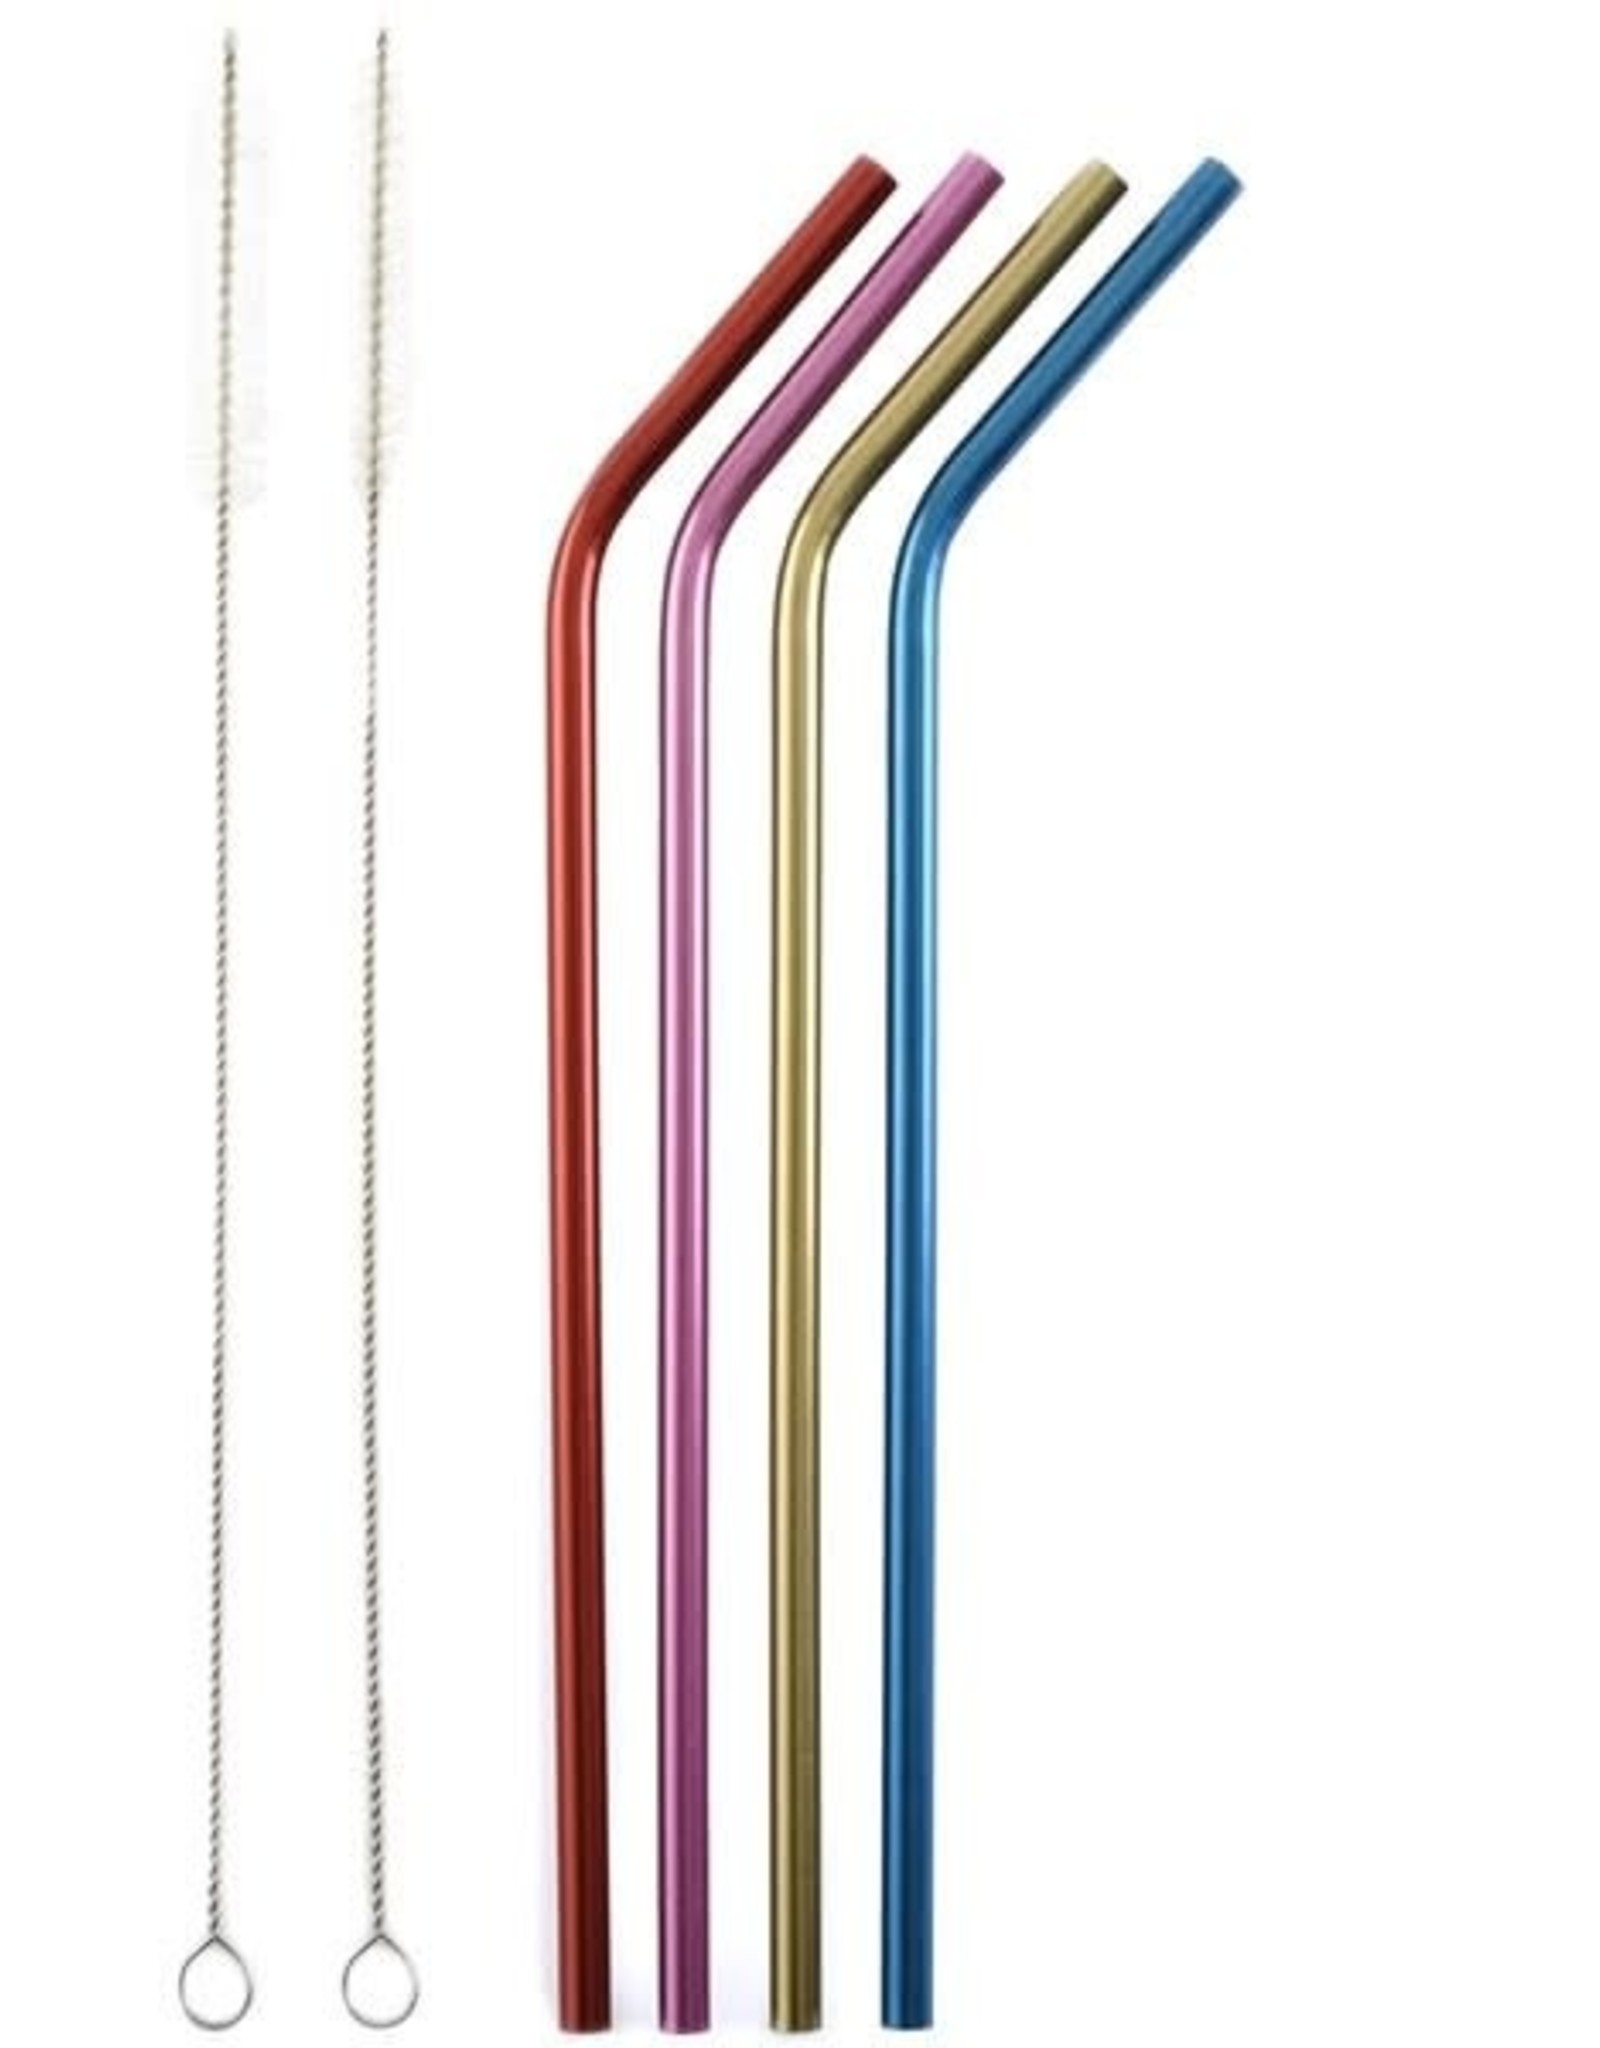 4 STAINLESS STEEL METALLIC DRINKING STRAWS W/2 CLEANING BRUSHES